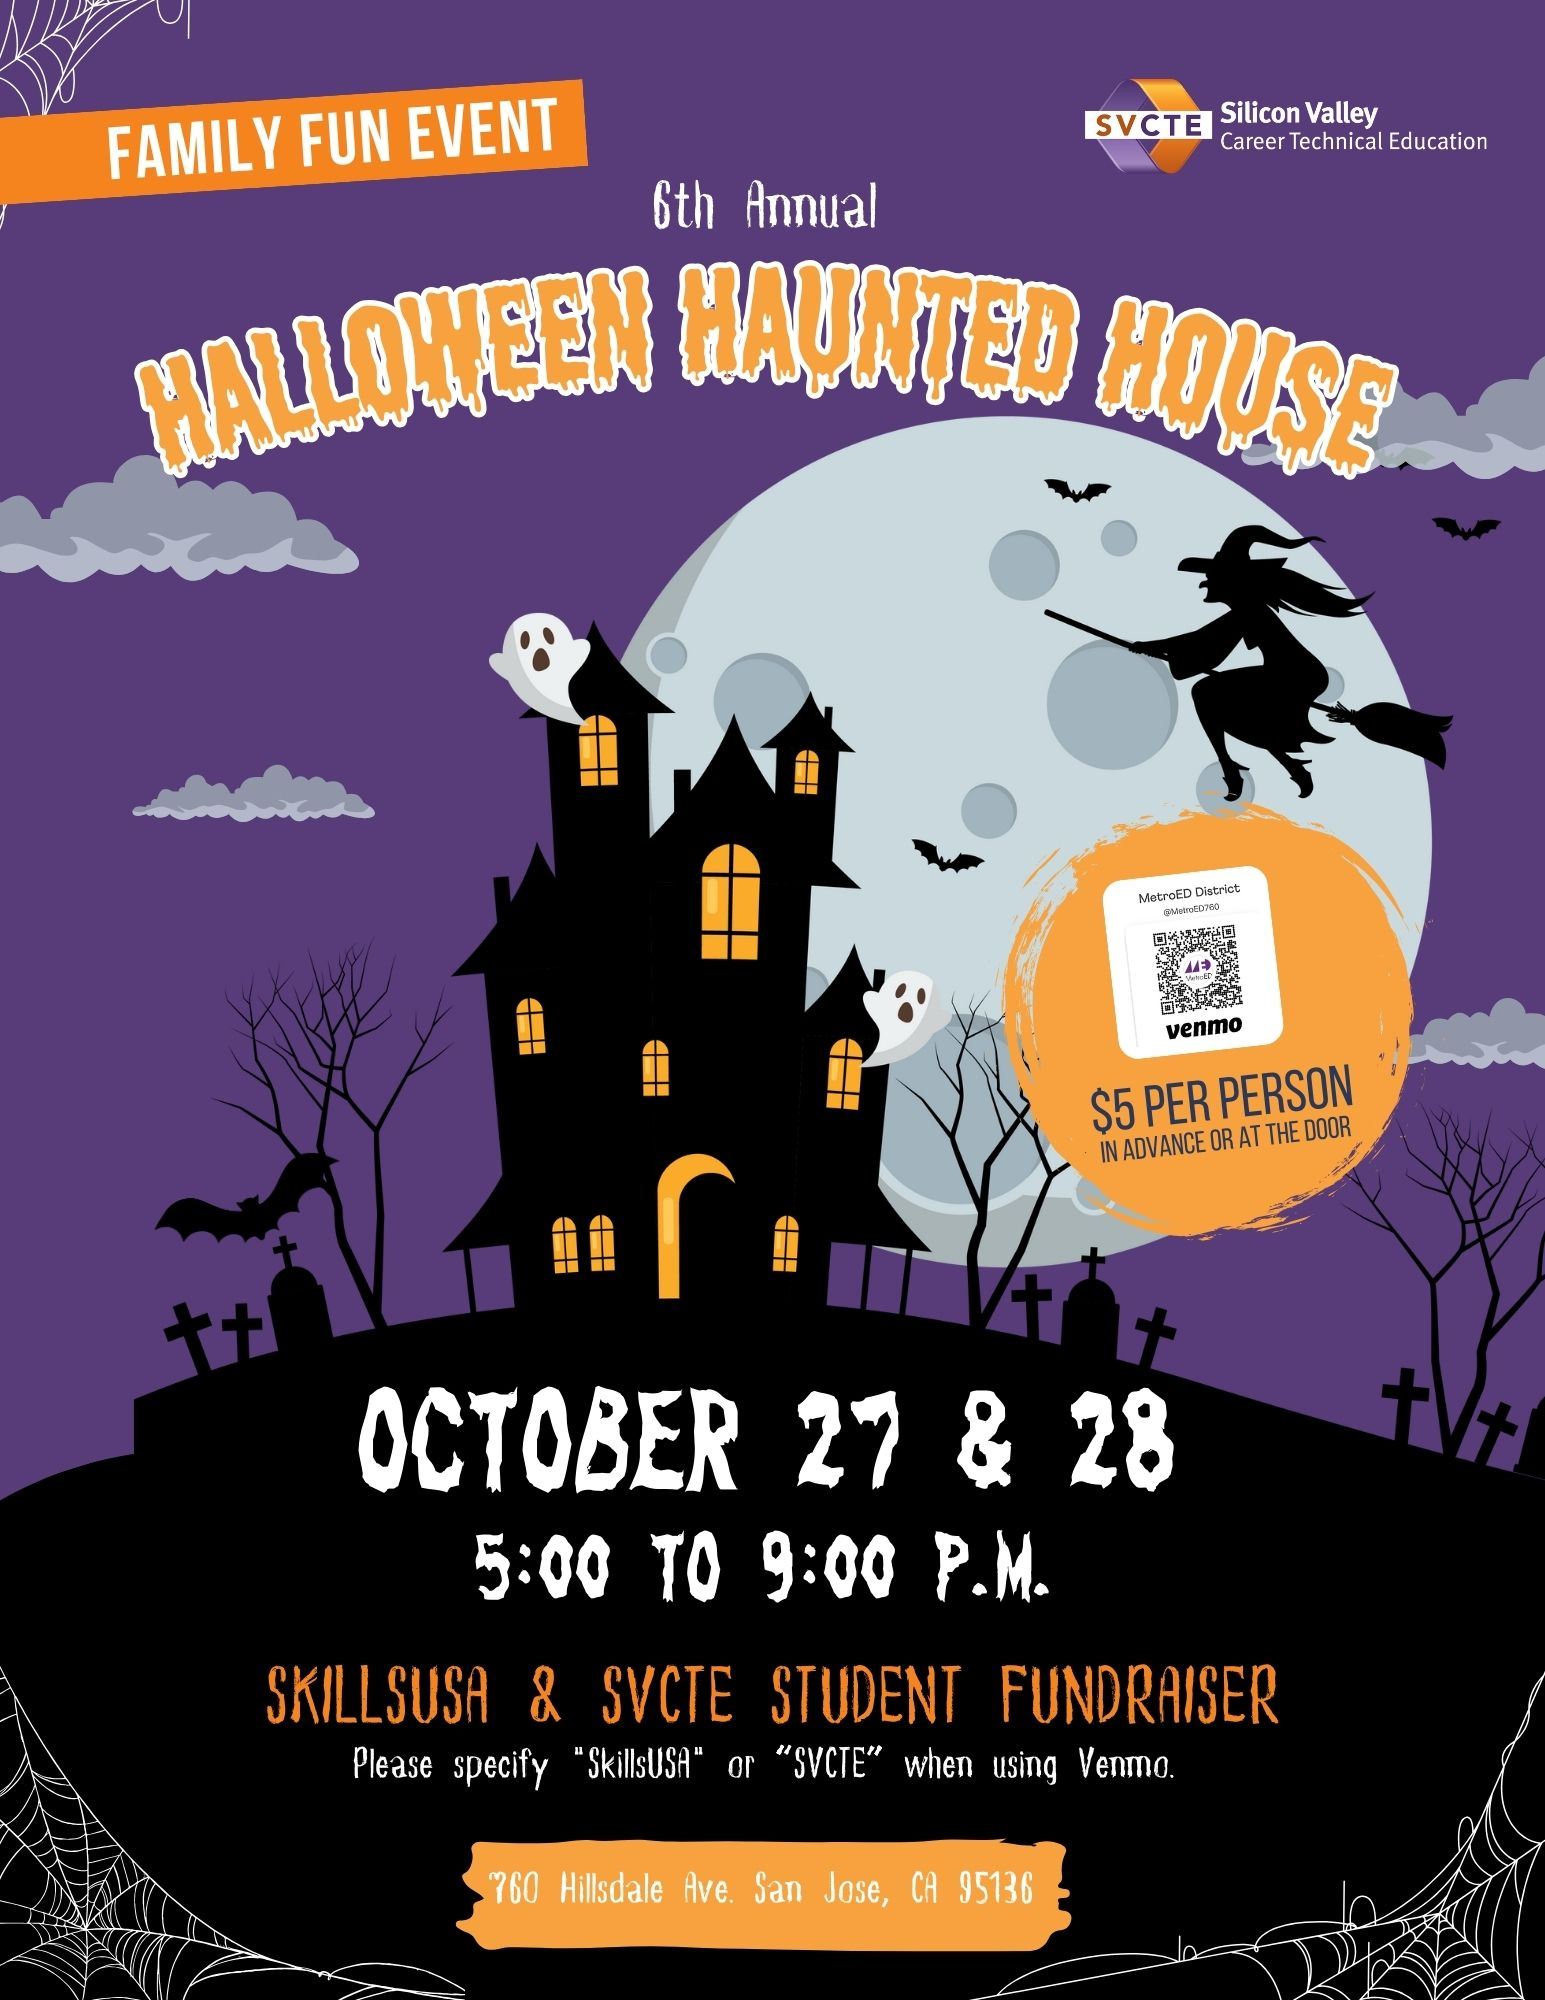  SVCTE 6th Annual Haunted House Oct. 27 & 28, 5 to 9 p.m.